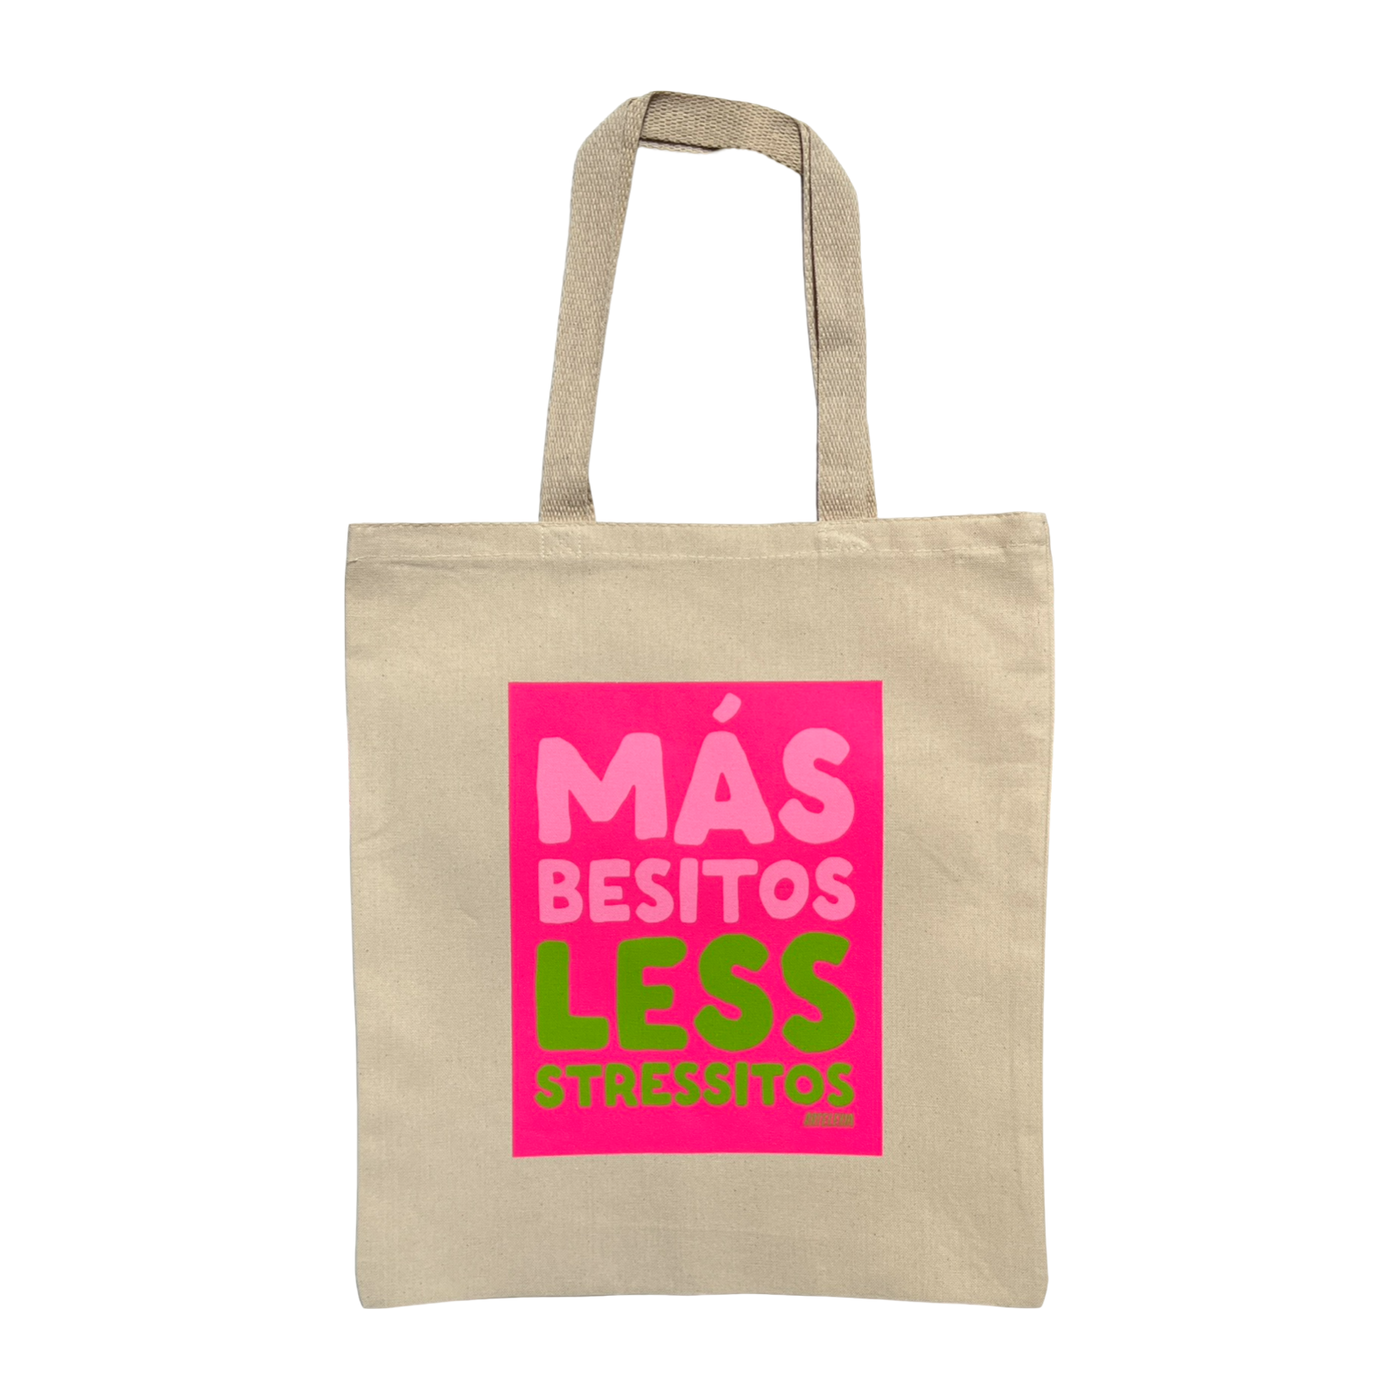 natural canvas tote back with a hot pink rectangle block and the phrase Mas Besitos Less Stressitos in light pink and green lettering